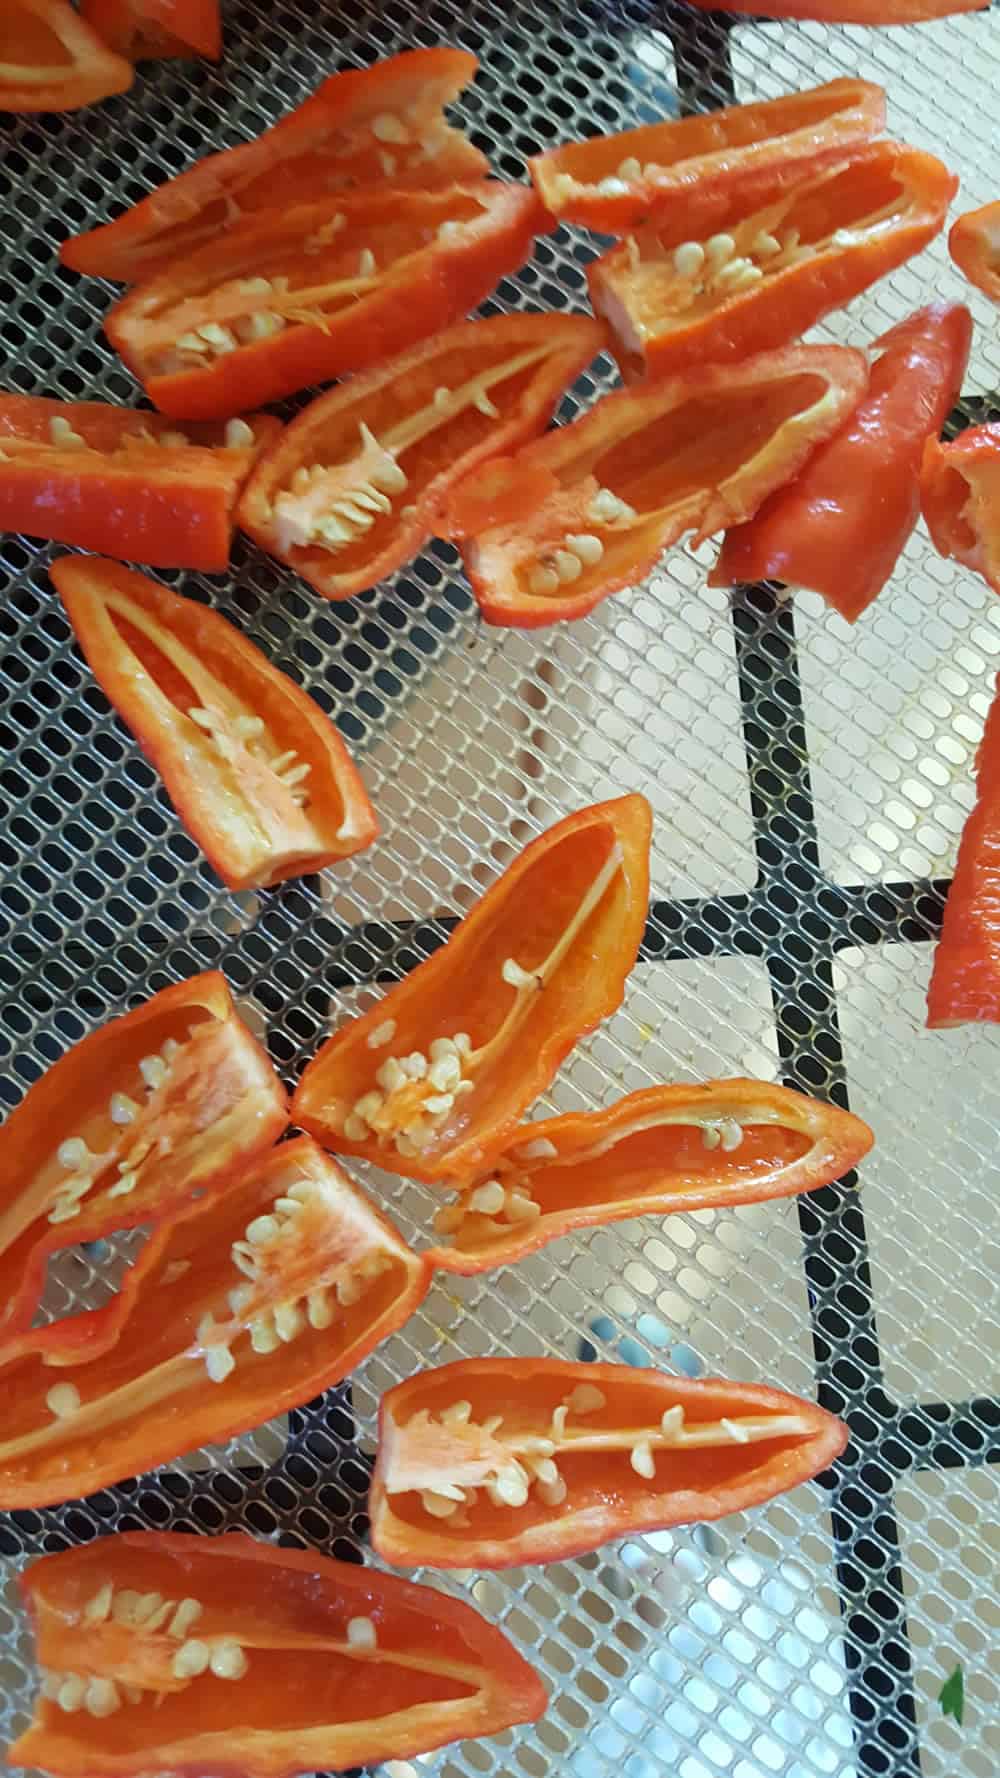 Sliced ghost peppers, ready to dehydrate